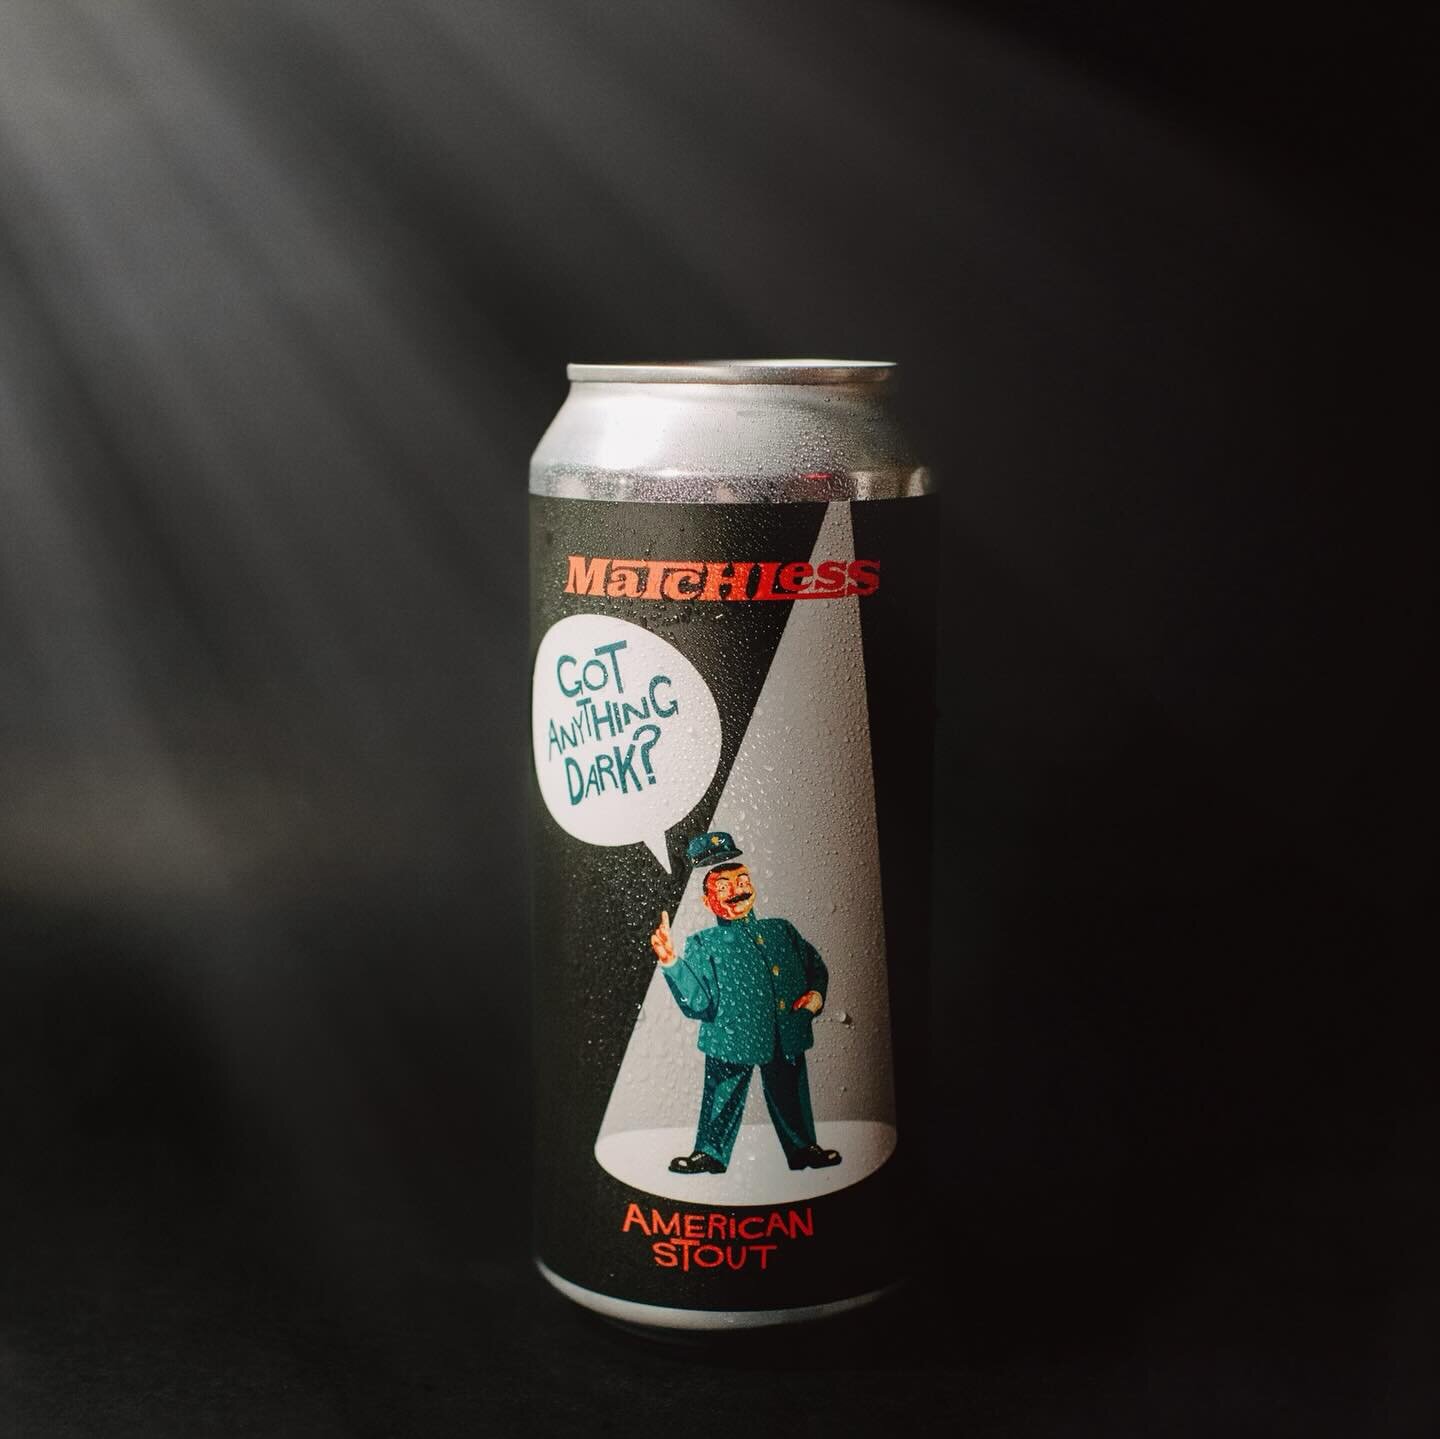 🔦⚫️Got Anything Dark⚫️🔦

I see you have IPAs. And... you&rsquo;ve got some lagers, but&hellip; you got anything DARK? 
We do! We made a no-nonsense quaffable American stout, starting with Pale, Weyermann Barke Munich, Simpsons Dark Crystal, Crisp R